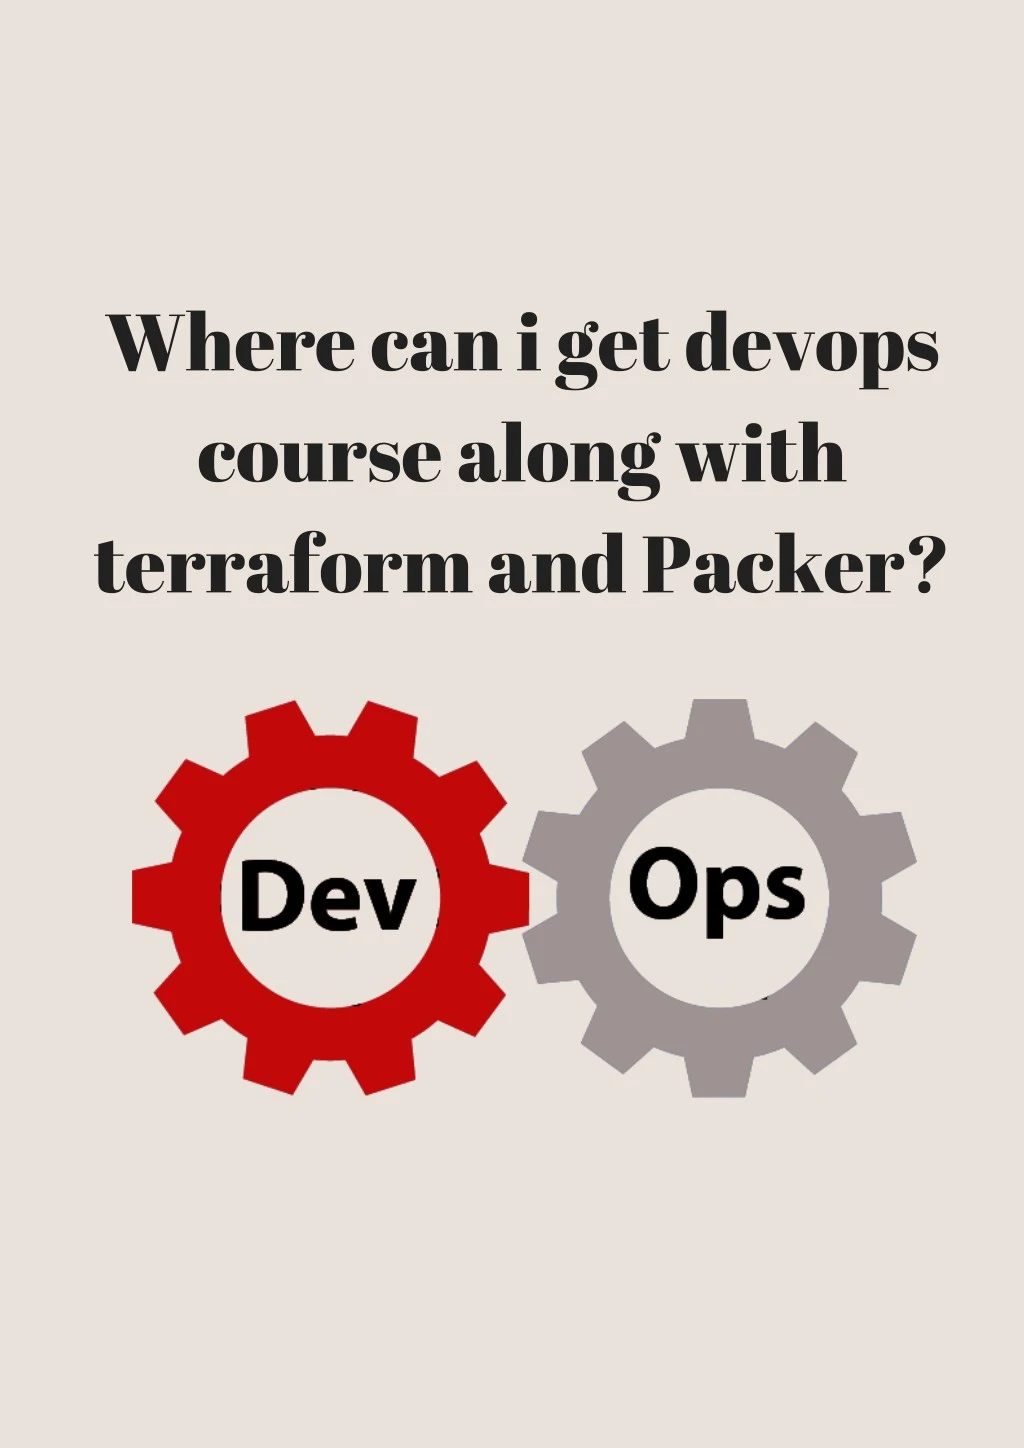 where can i get devops course along with